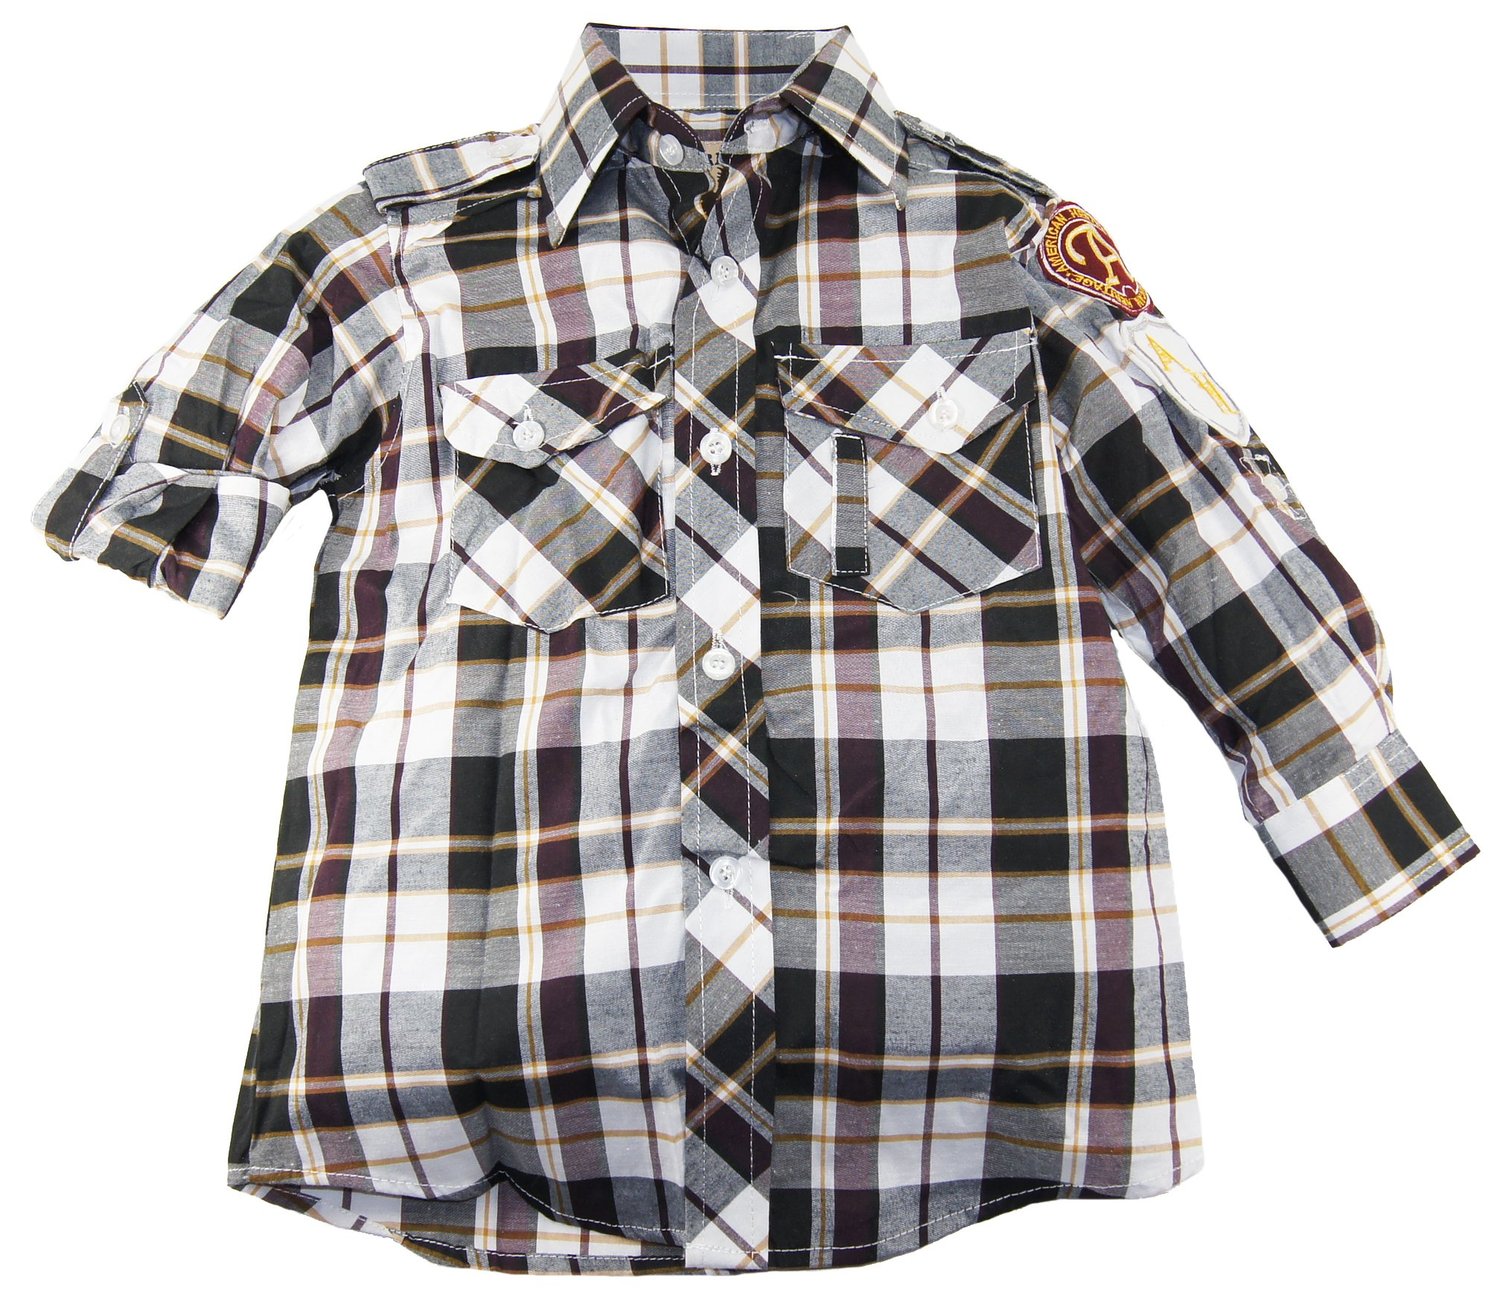 American Heritage Little Boys' Plaid Casual Roll Up Long Sleeve Shirt